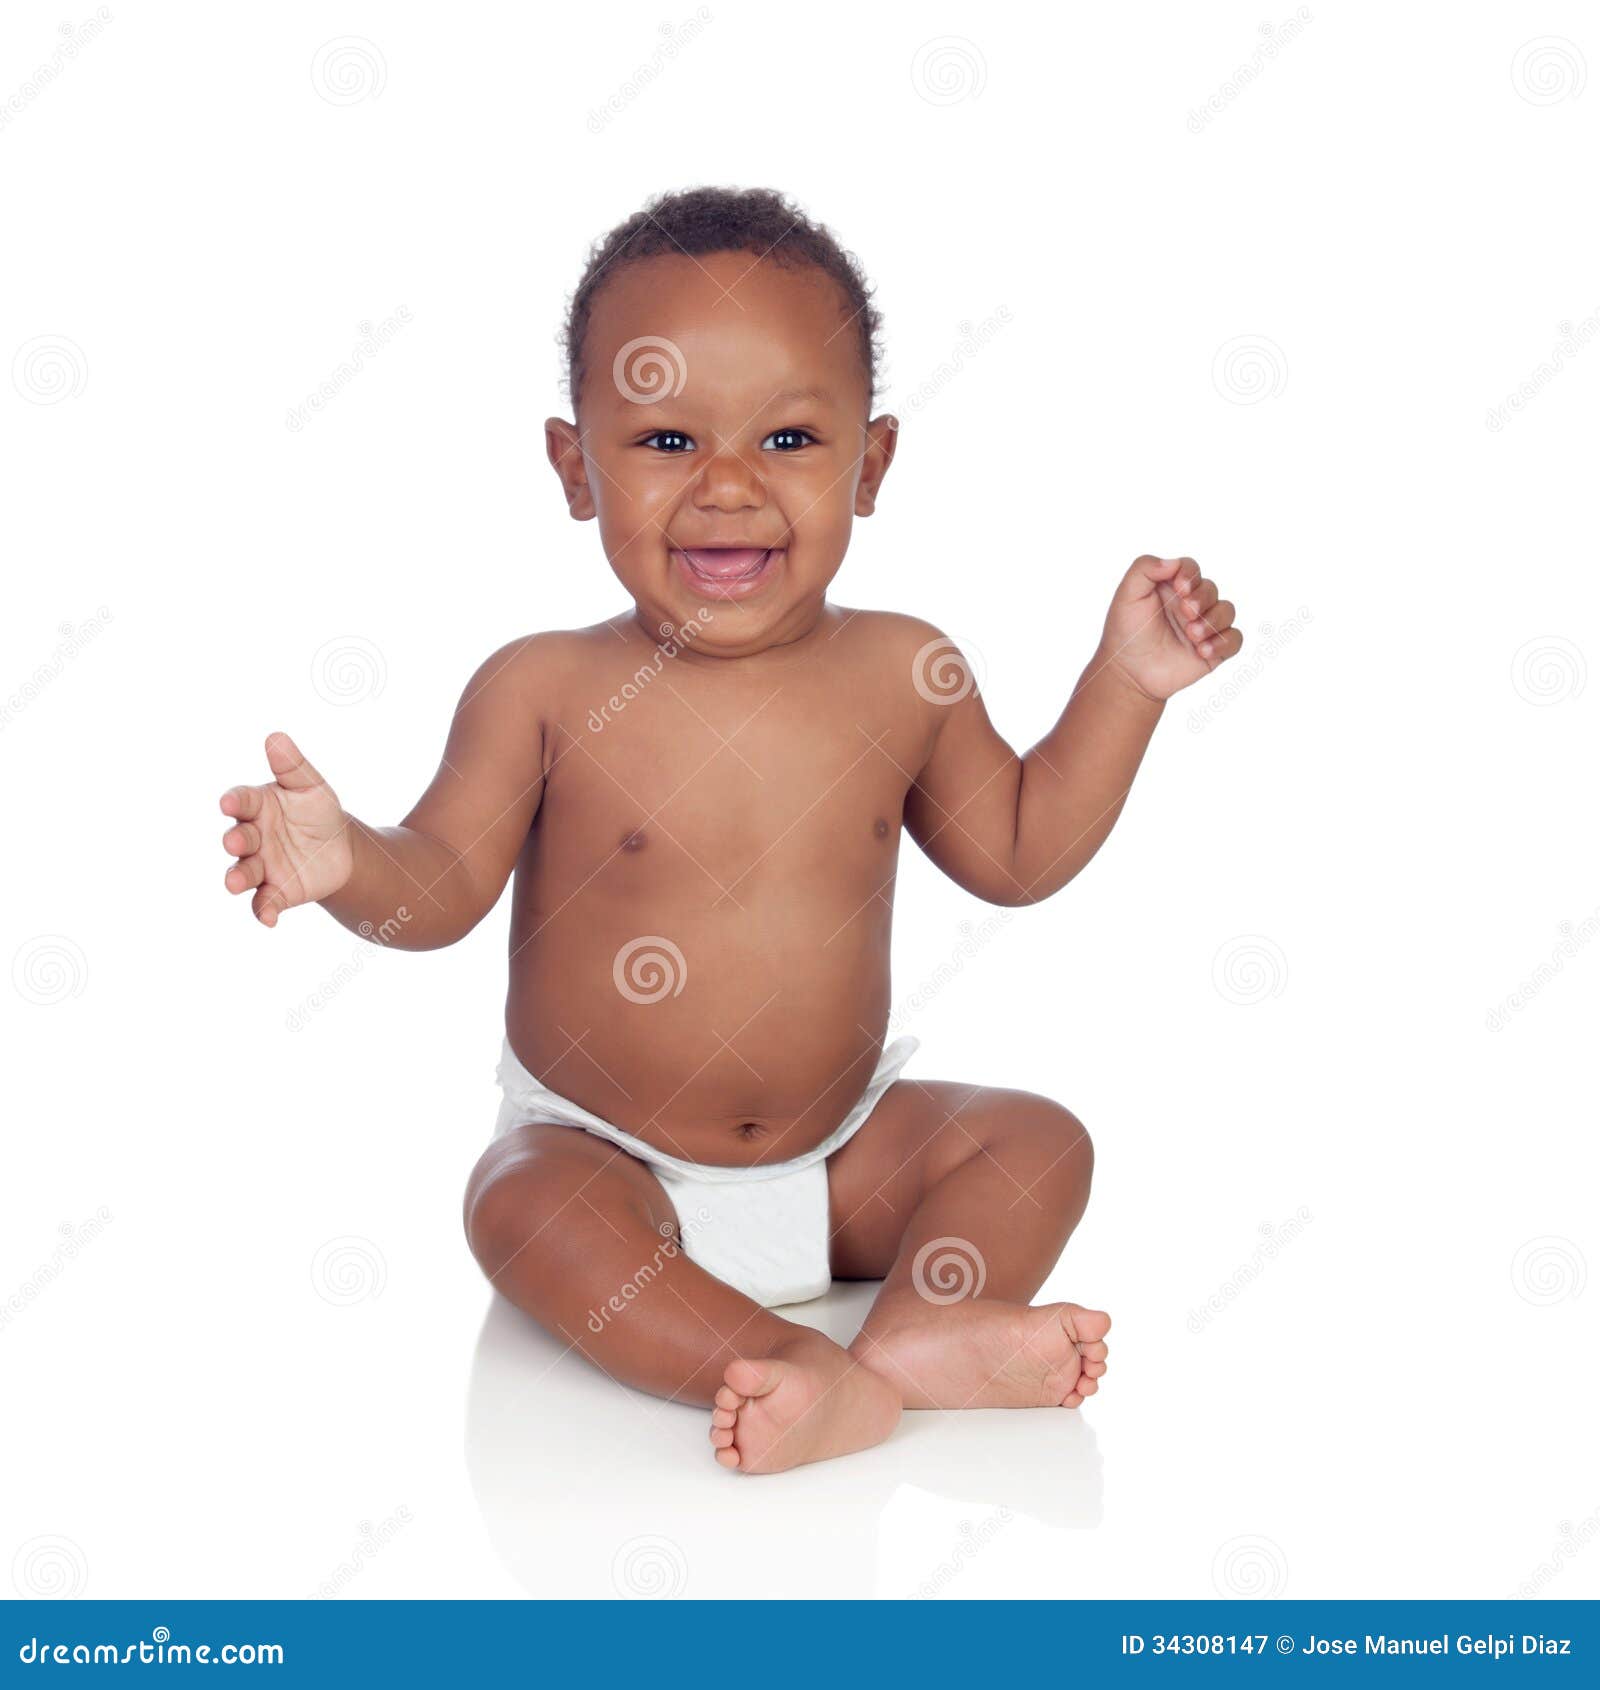 adorable african baby in diaper sitting on the floor